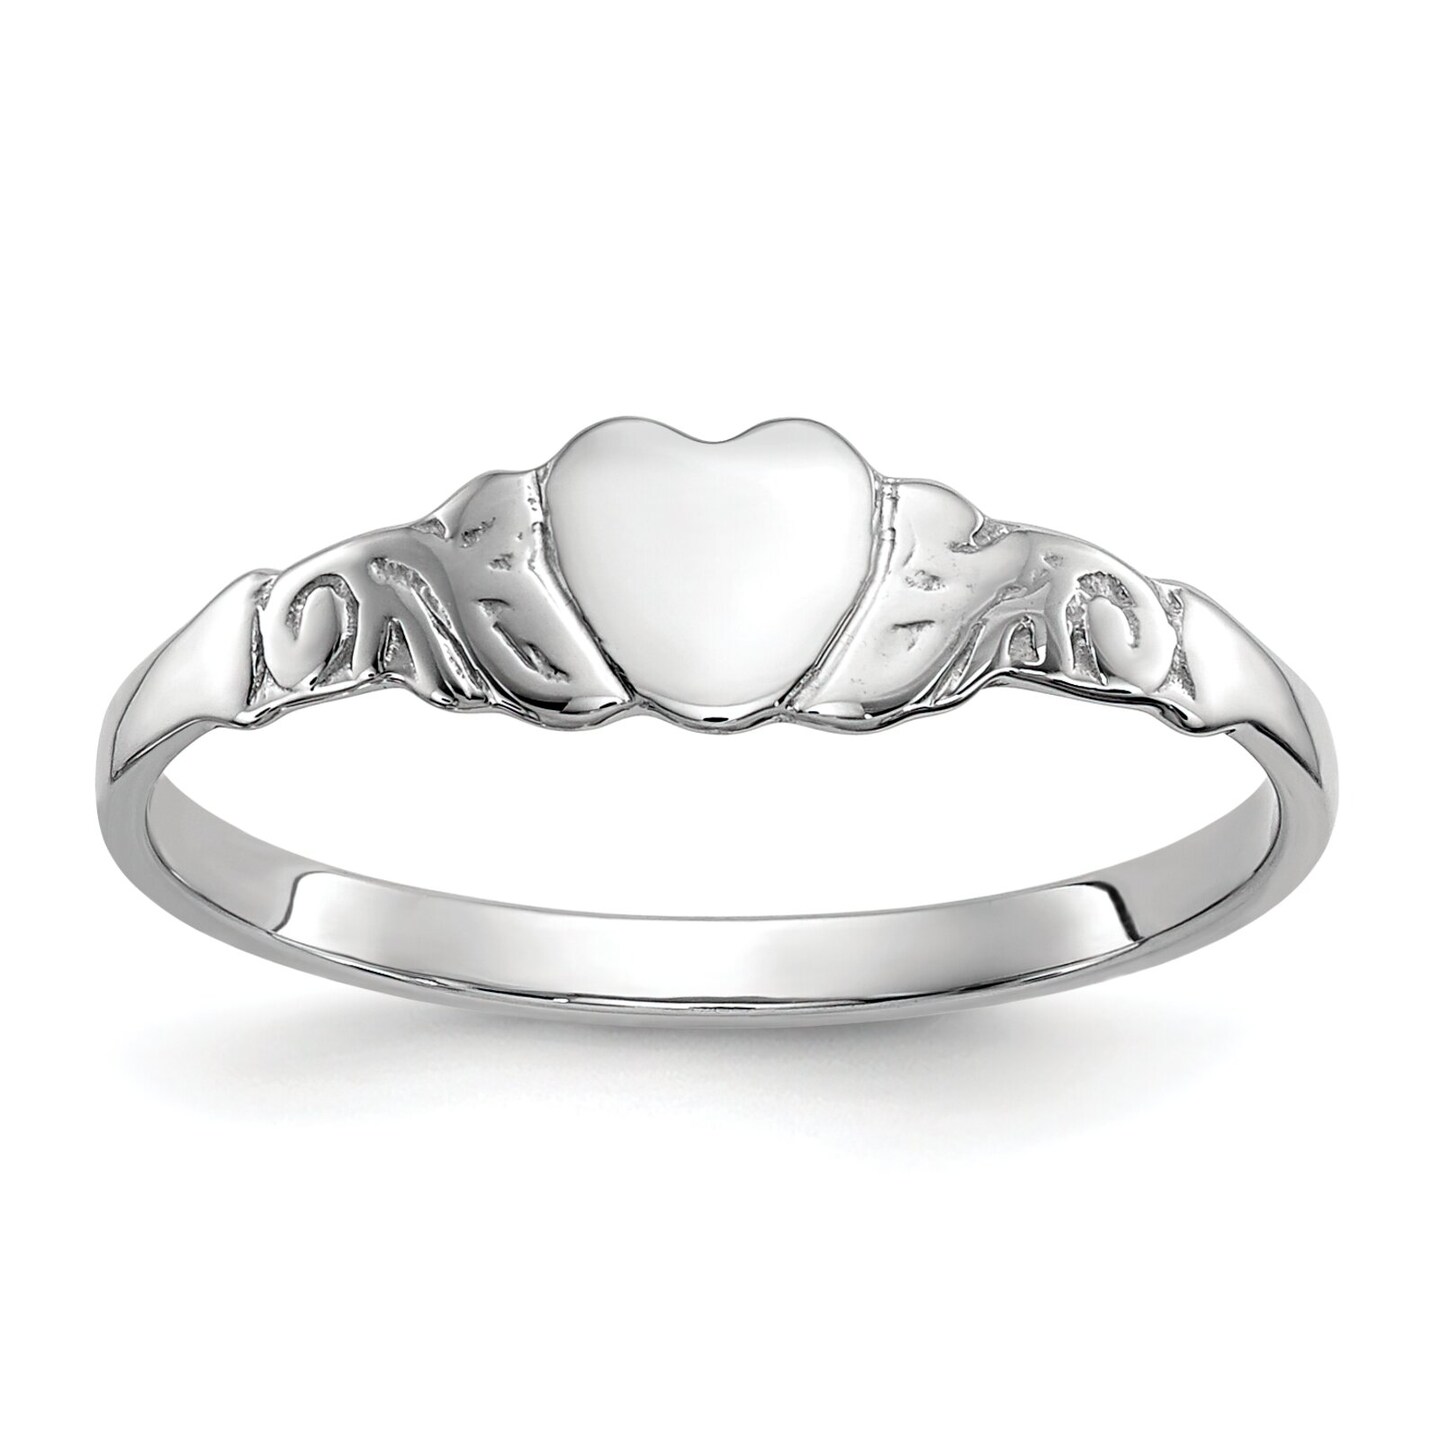 10K White Gold Heart Ring Childs Jewelry Size 4.5